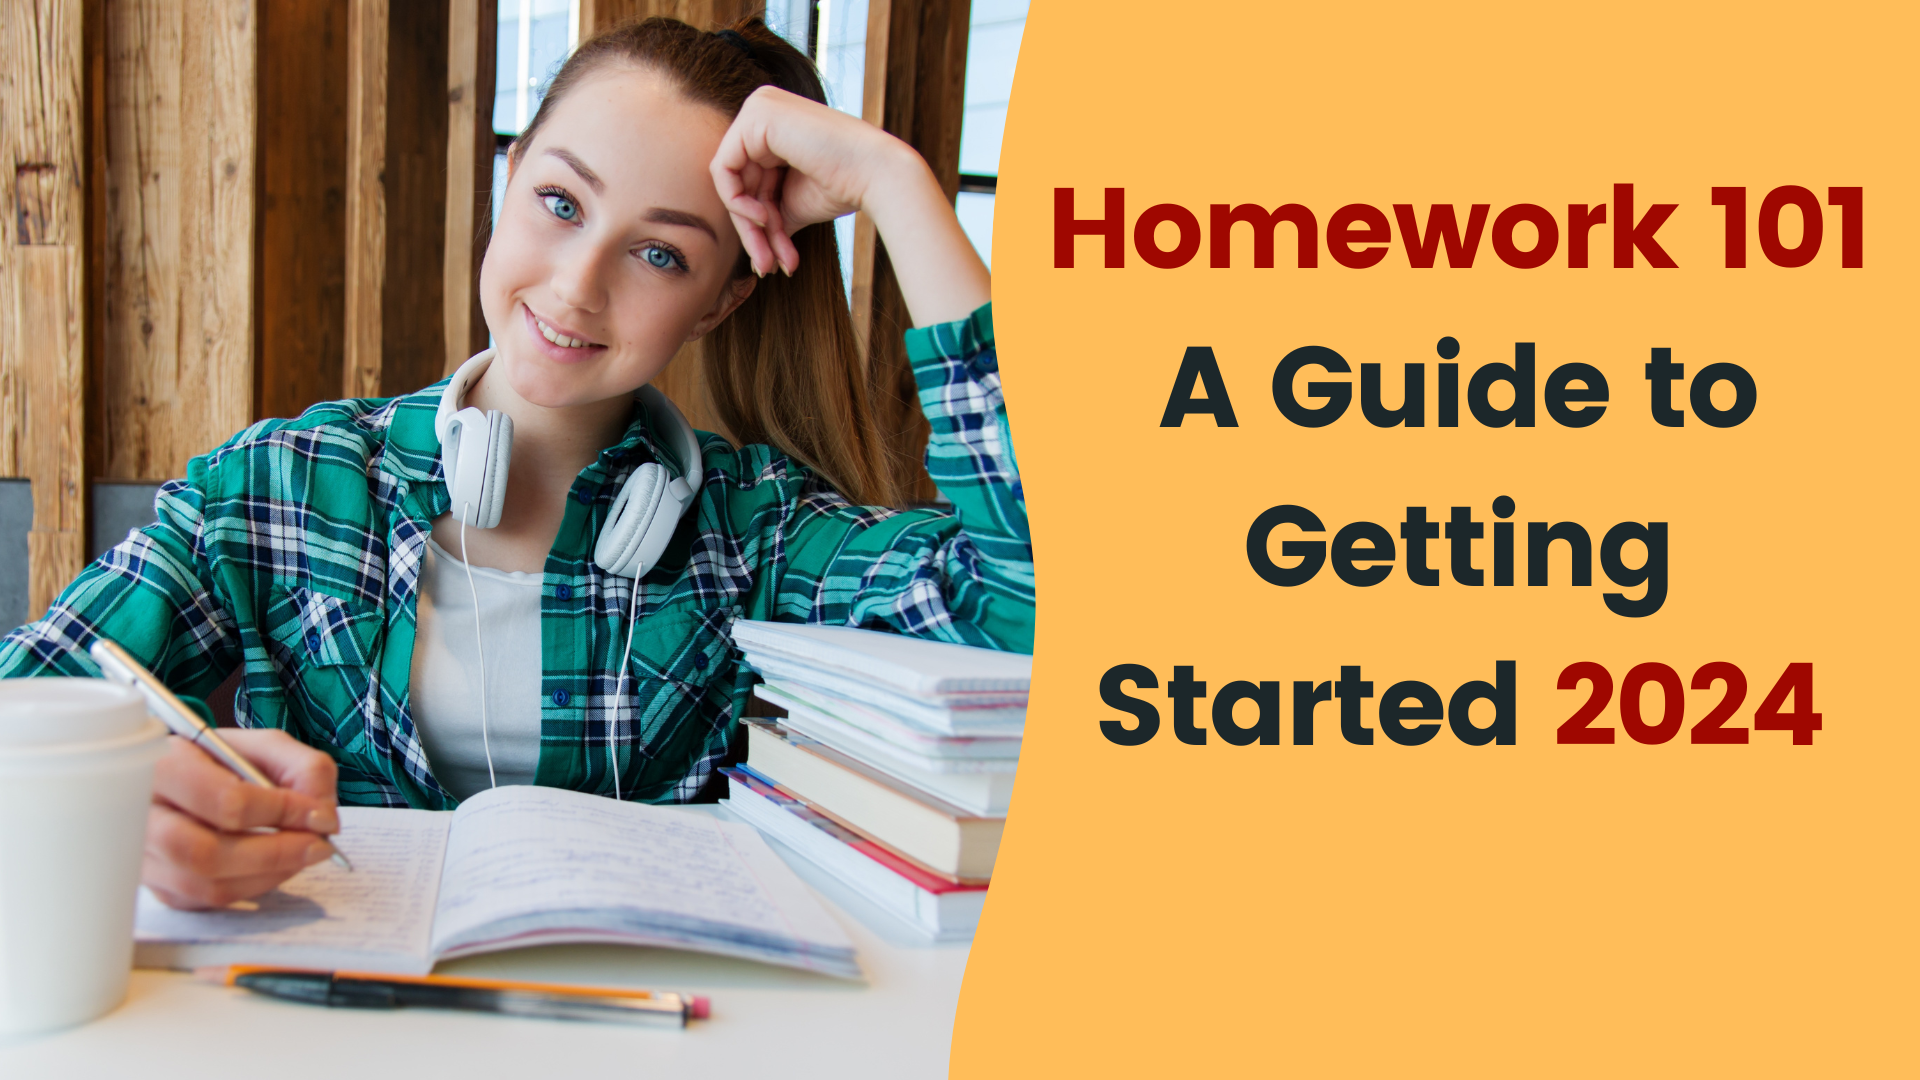 Homework 101: A Guide to Getting Started 2024